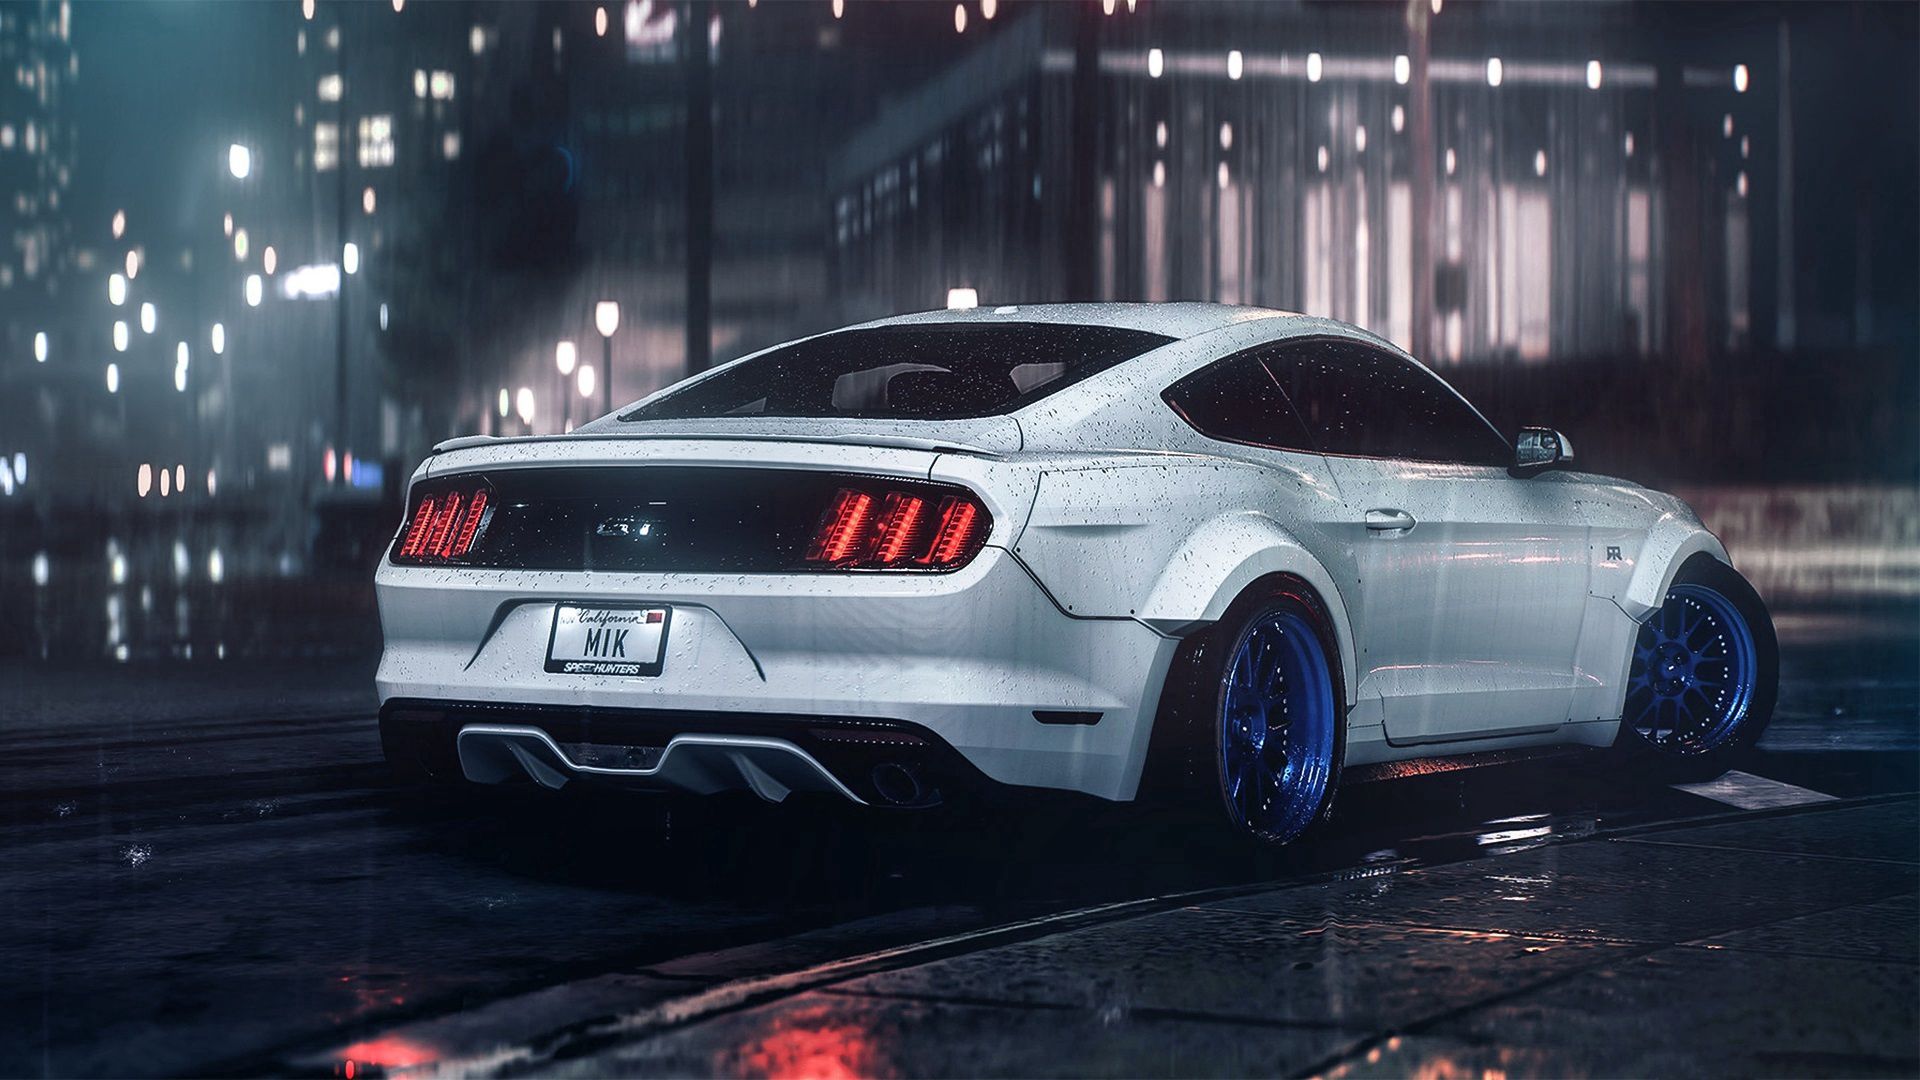 mustang, cars, 2016, rtr, ford, gt